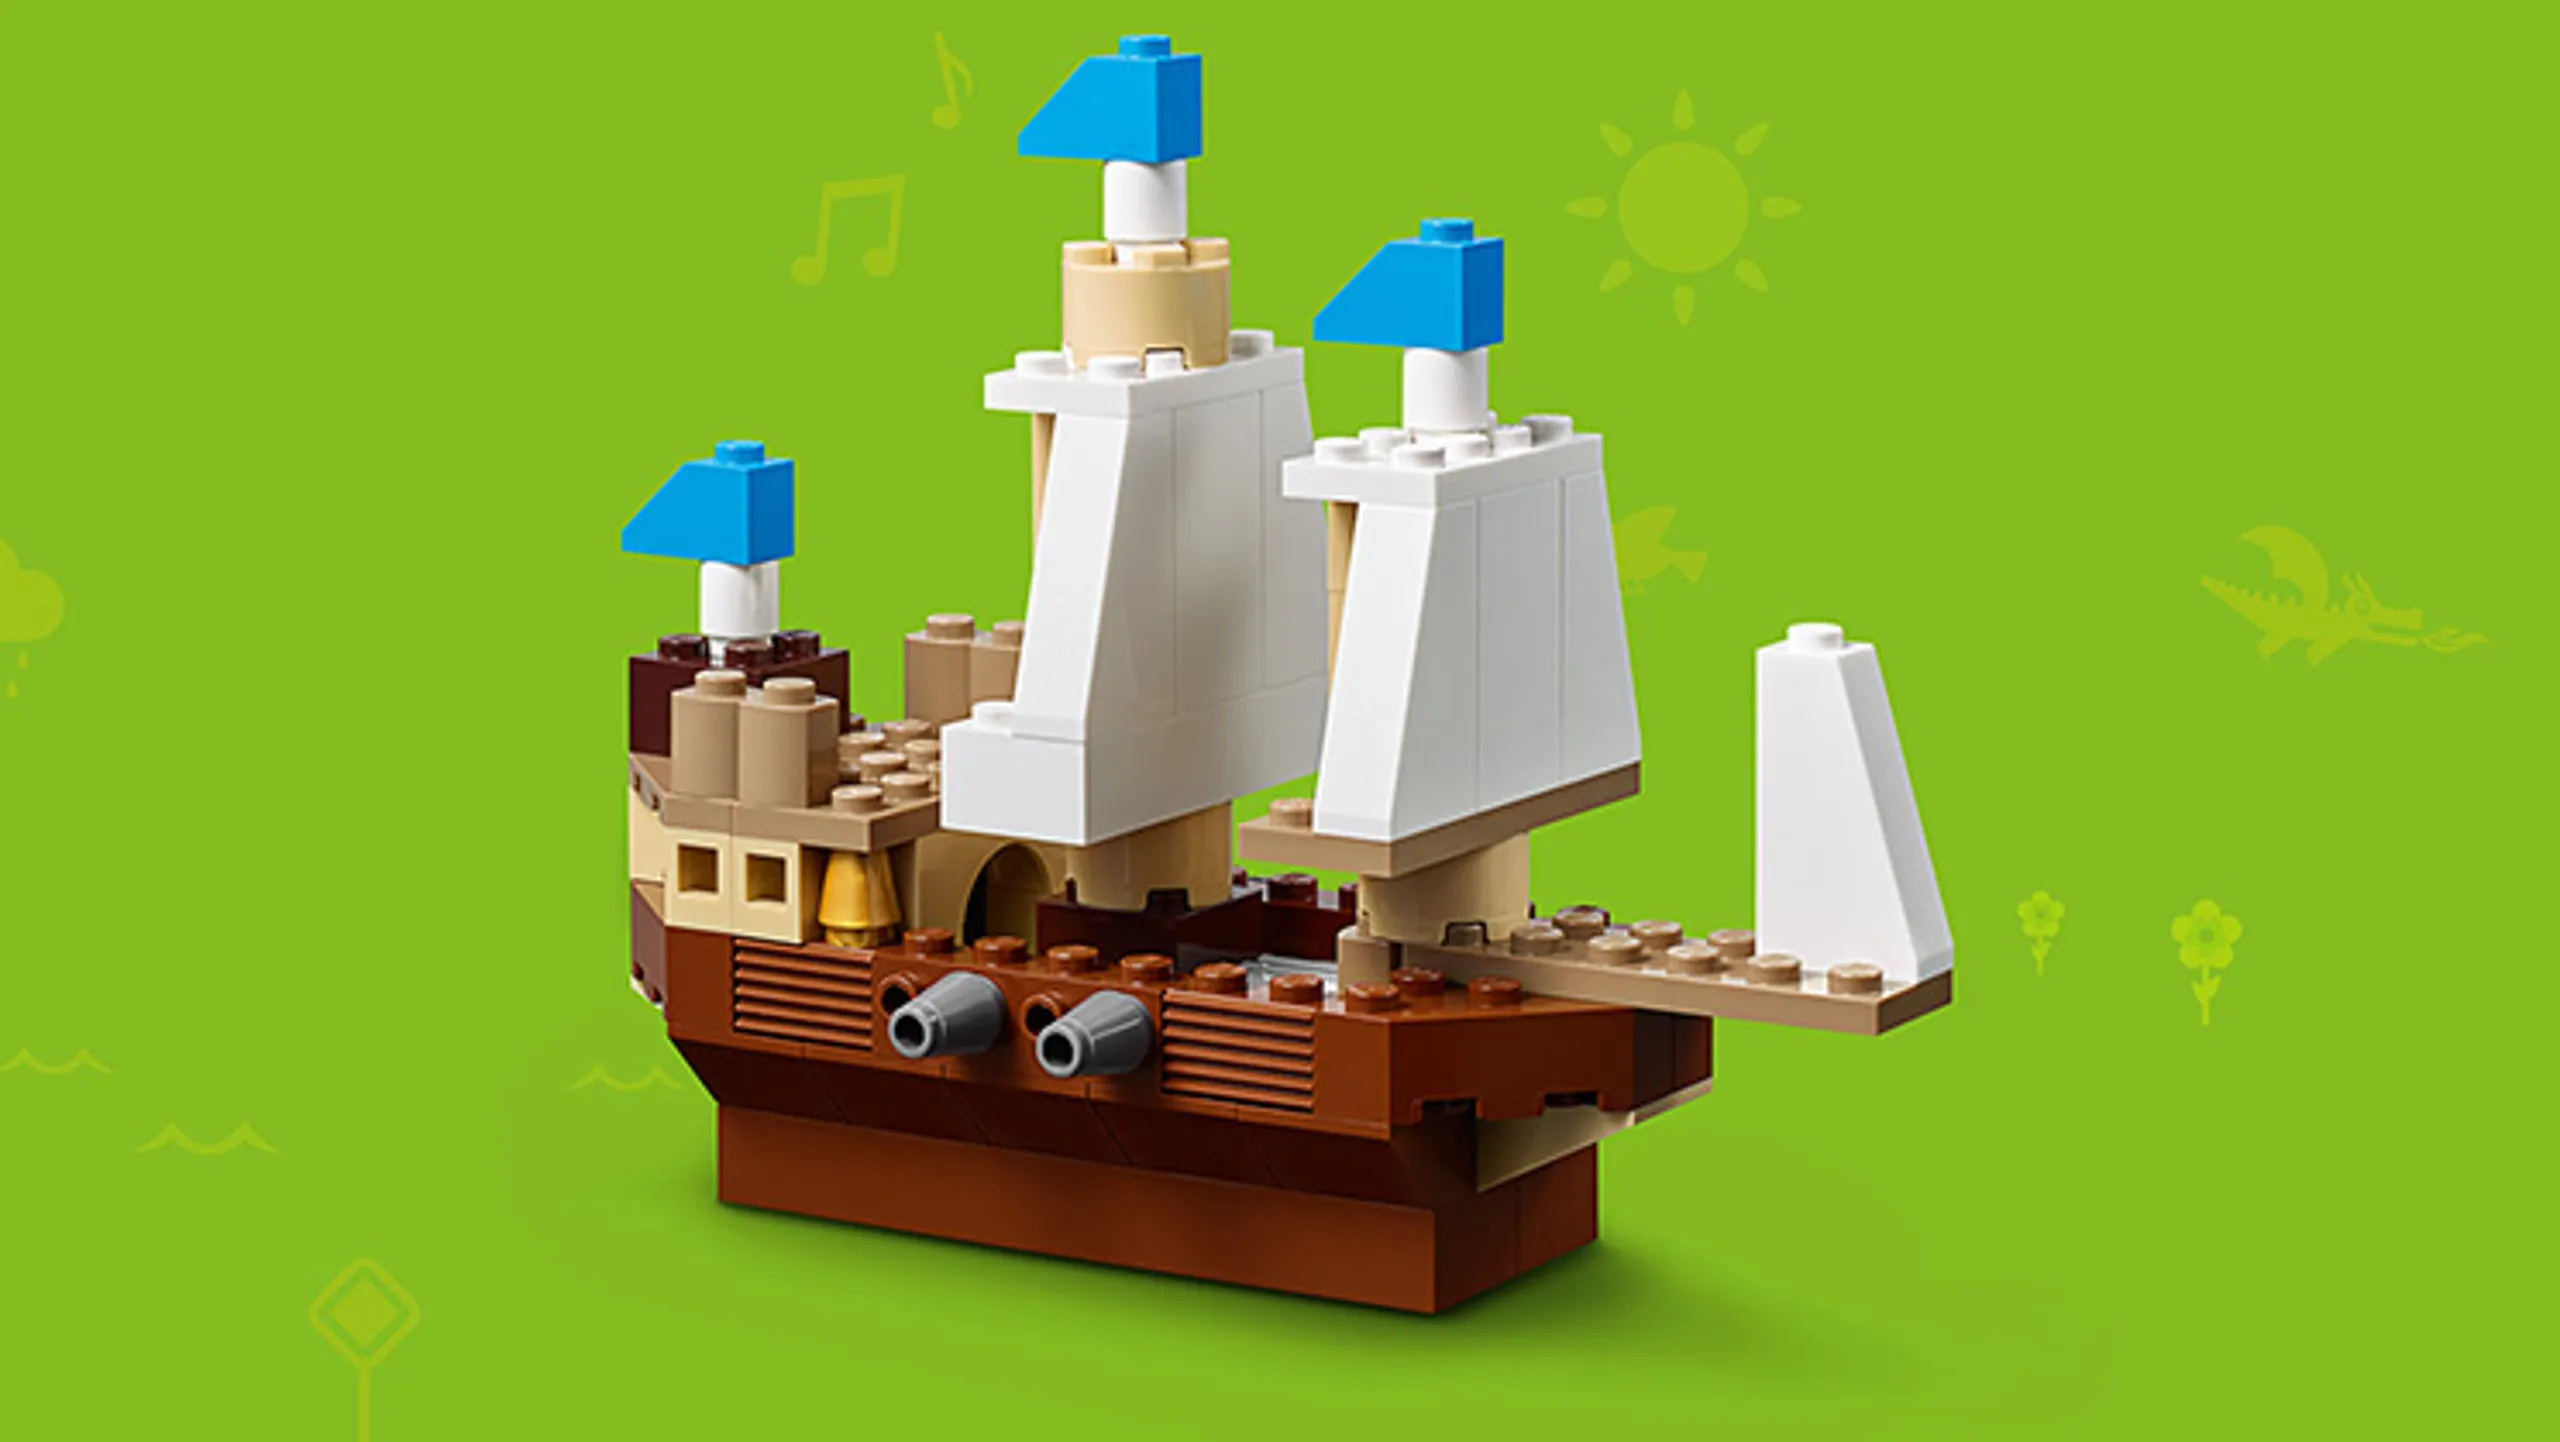 LEGO Classic Bricks Bricks Bricks - 10717 - Ahoy! Build a pirate ship with large white sails, canons and blue flags.